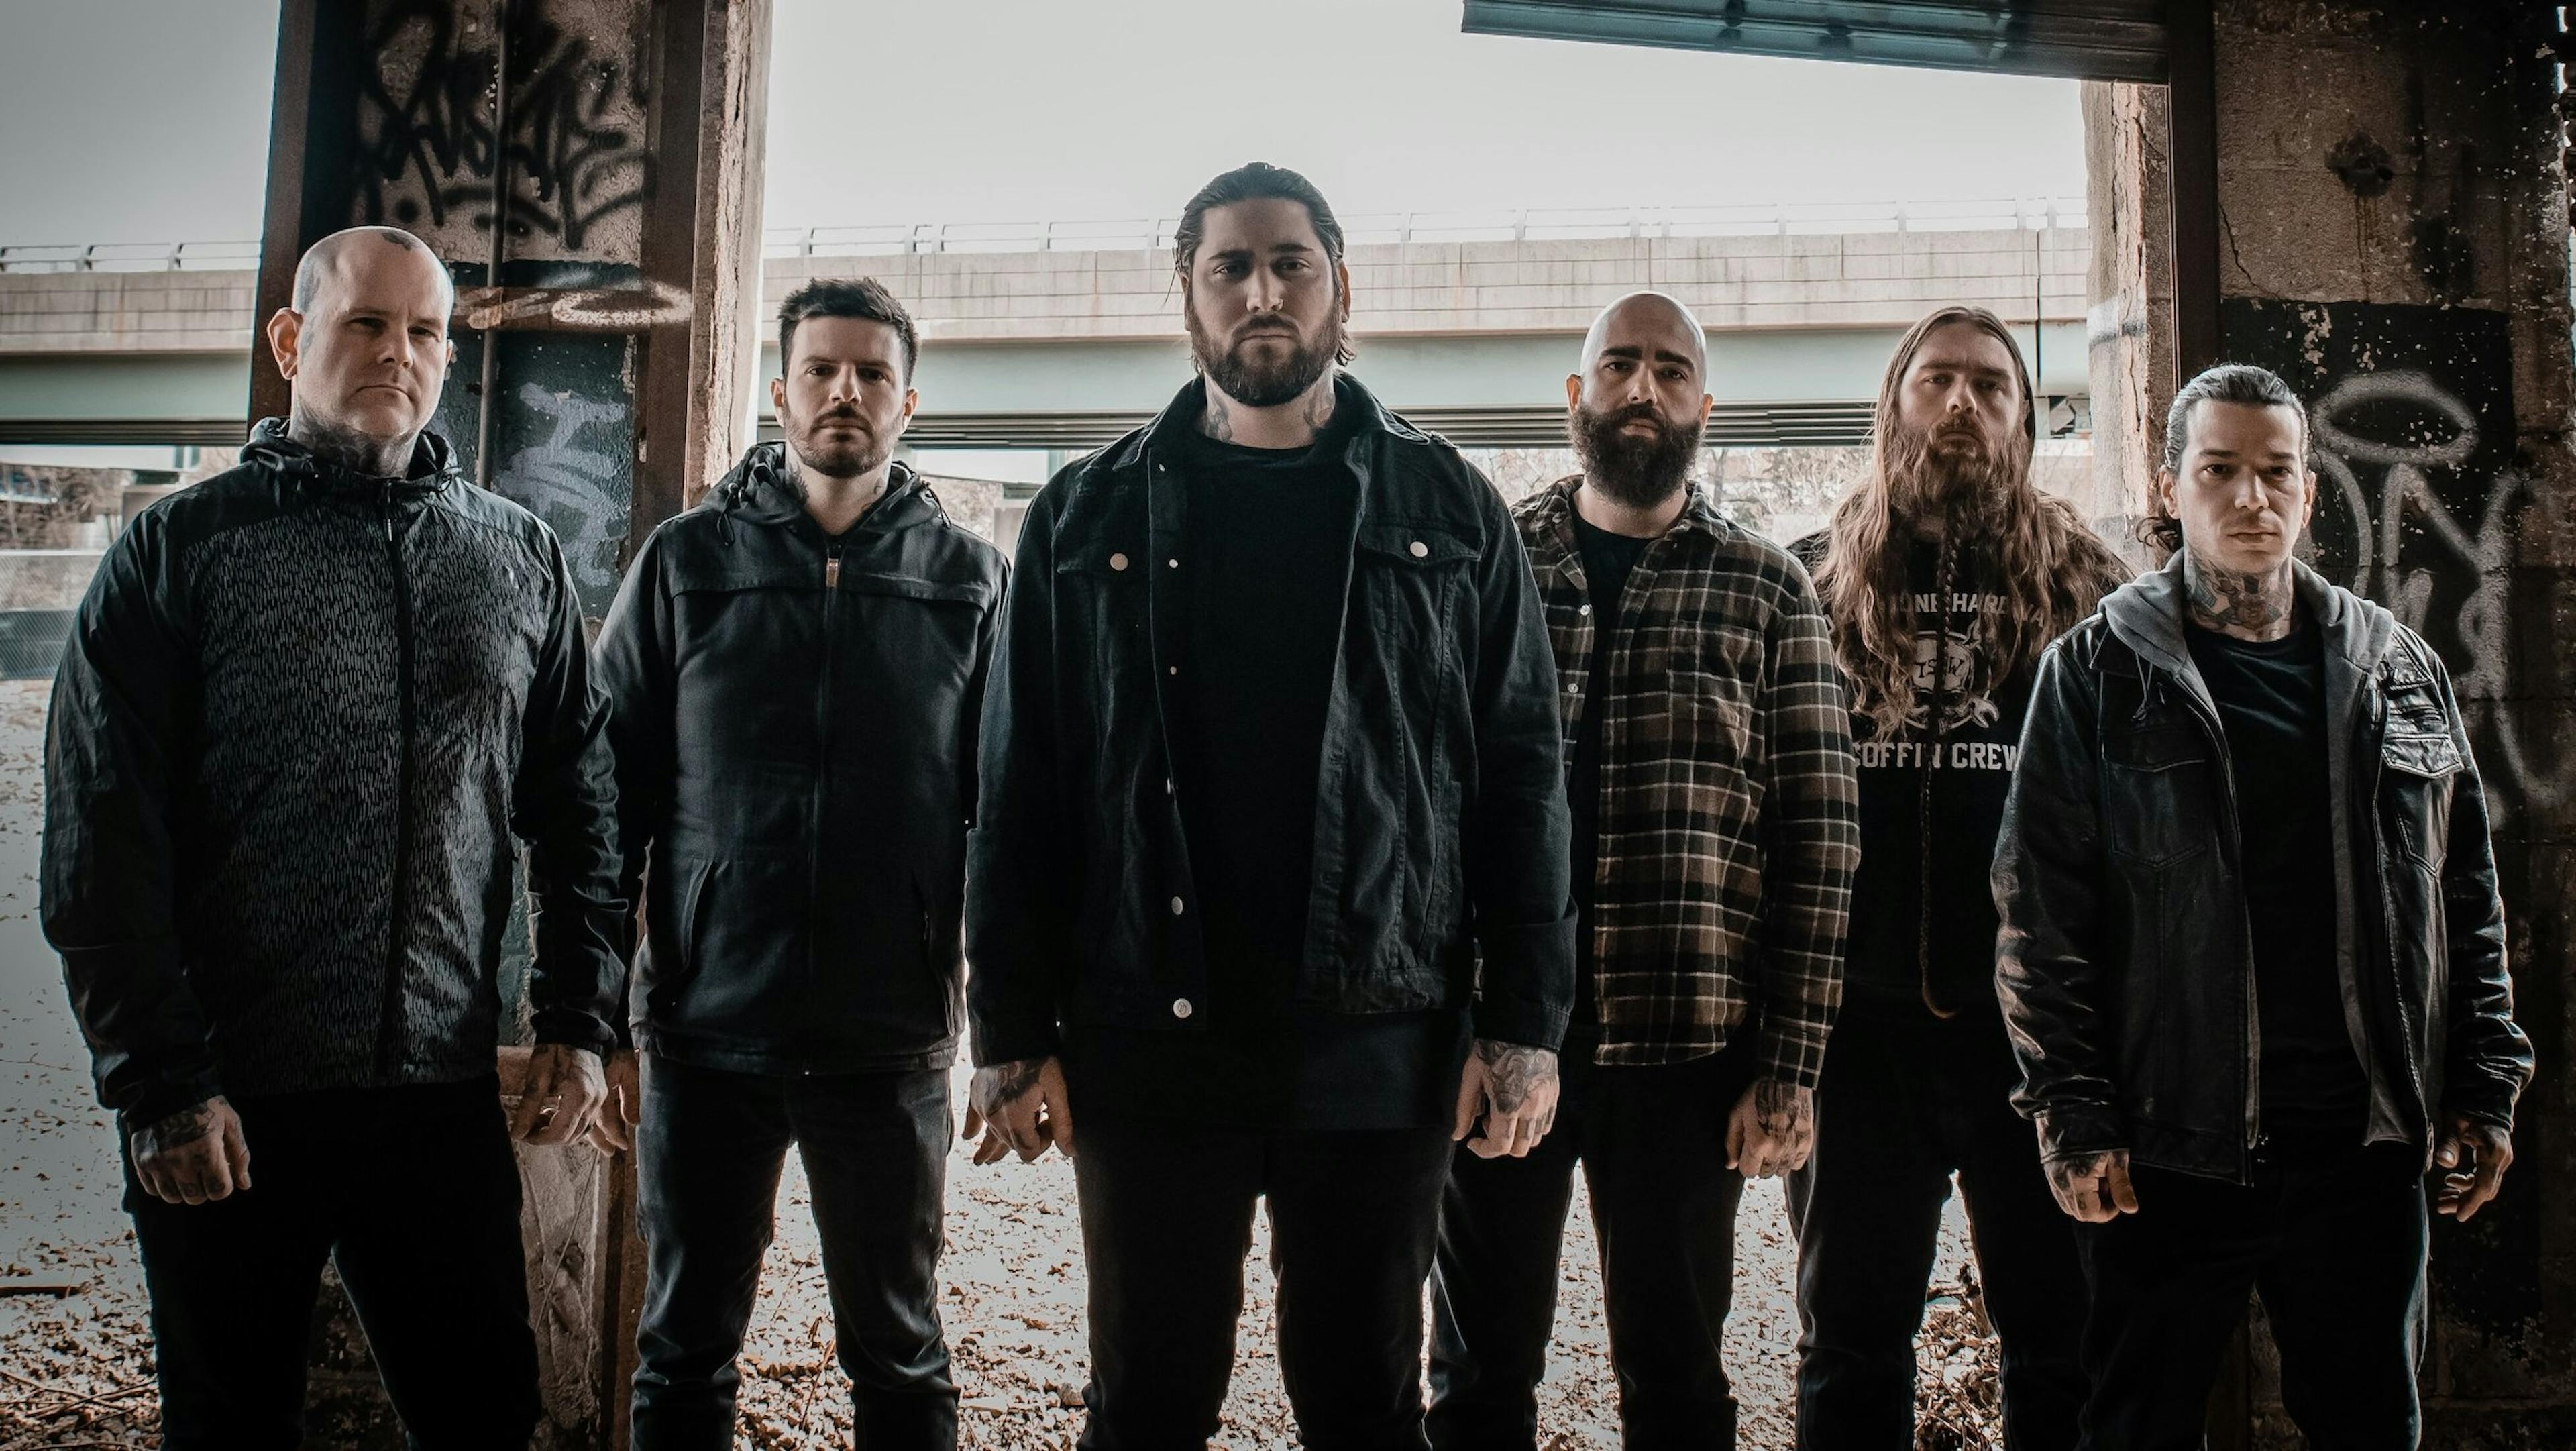 How Fit For An Autopsy Found A Unified Groove On Their New Album